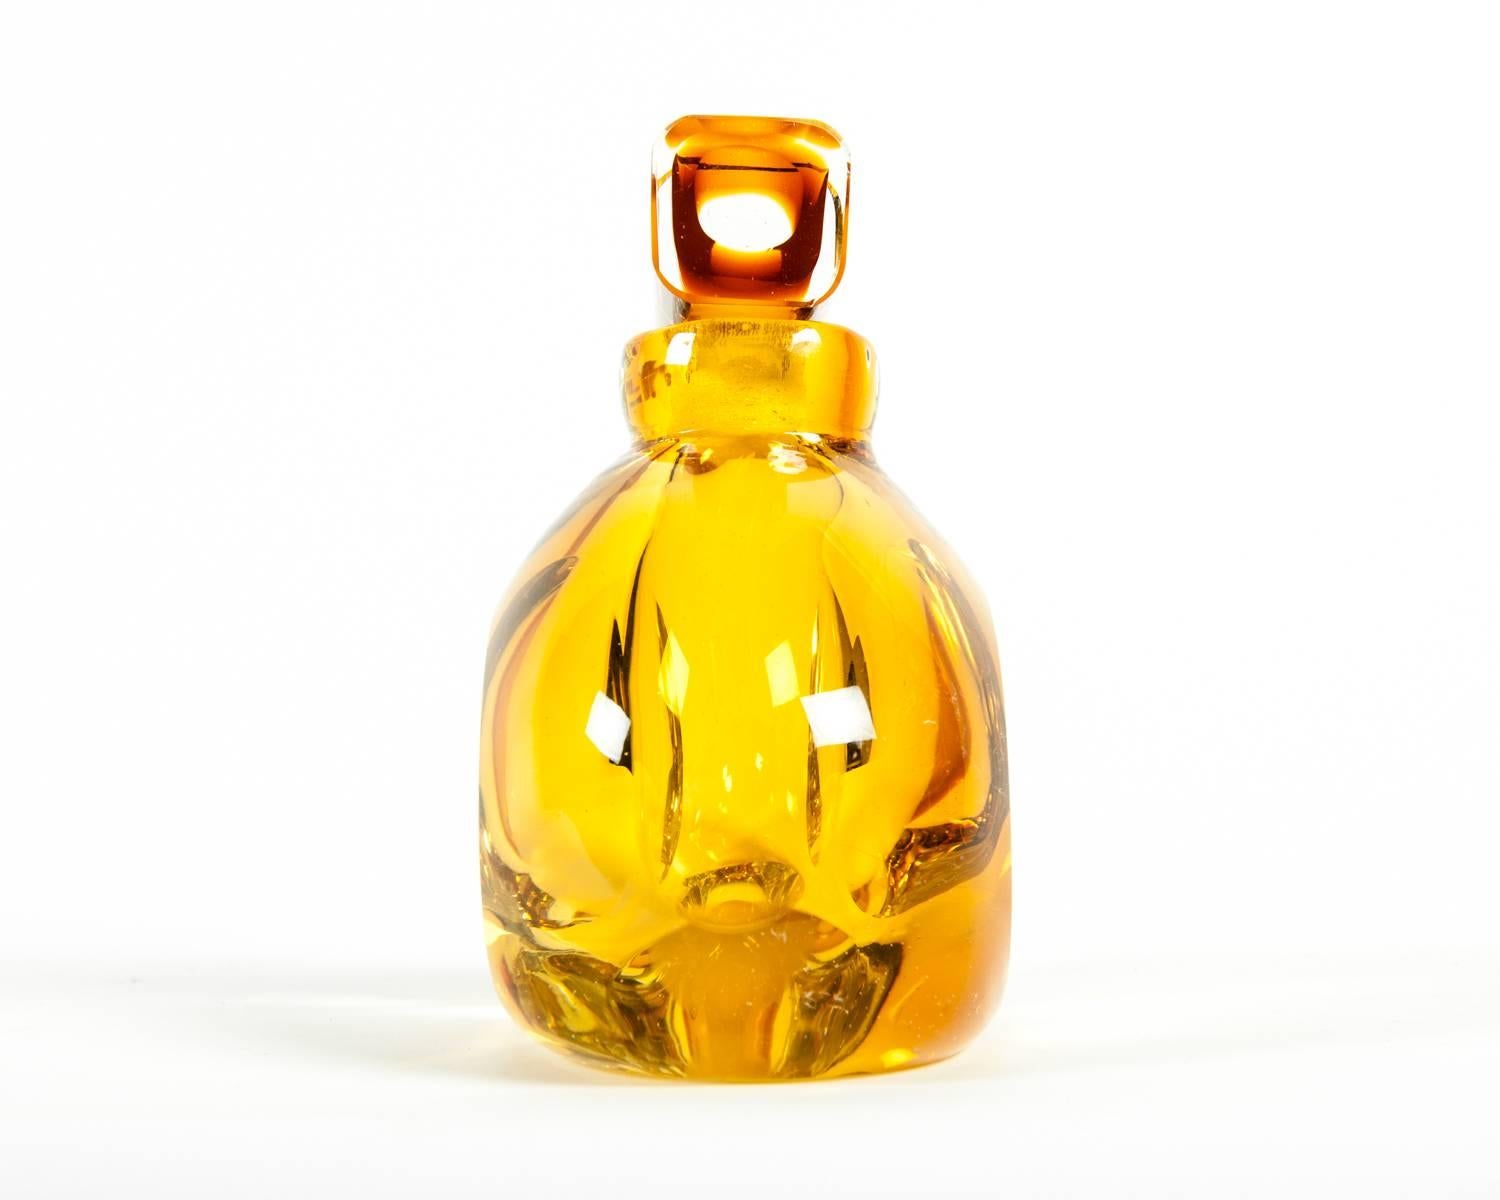 Vintage amber crystal decorative perfume bottle. Excellent condition. The perfume bottle measure 5.5 inches high x 3.5 x 5 inches width.